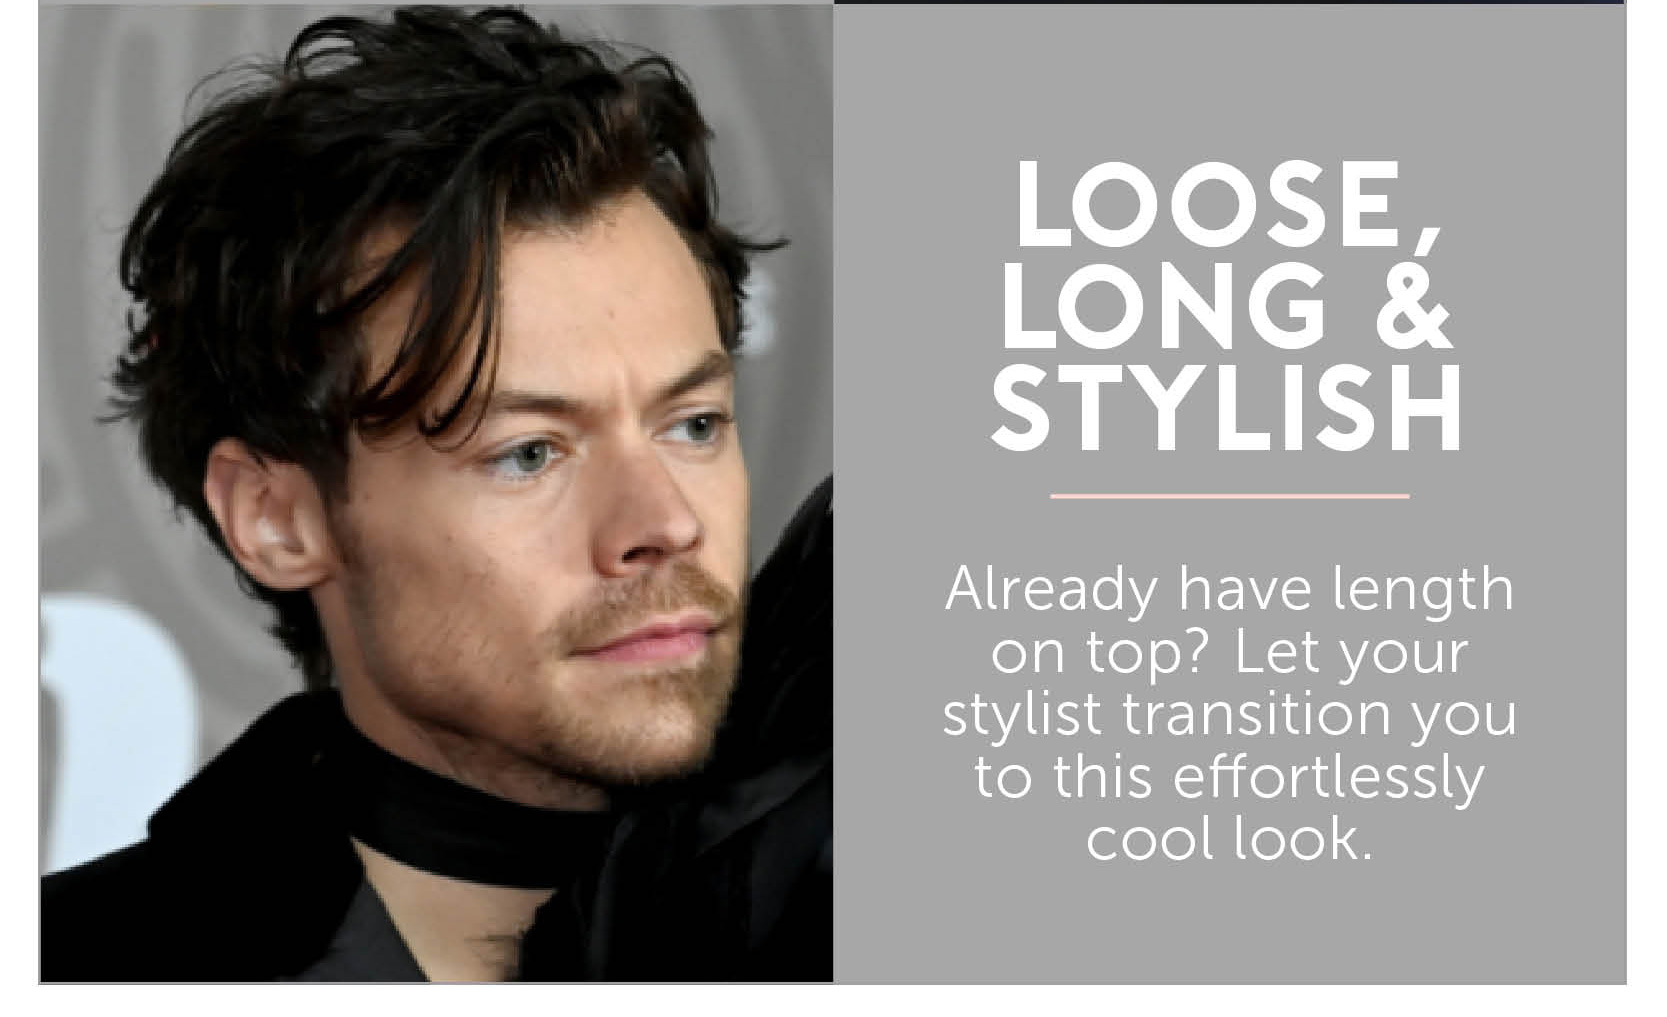 Loose, long, and stylish- Already have length on top? Let your stylist transition you to this effortlessly cool look.